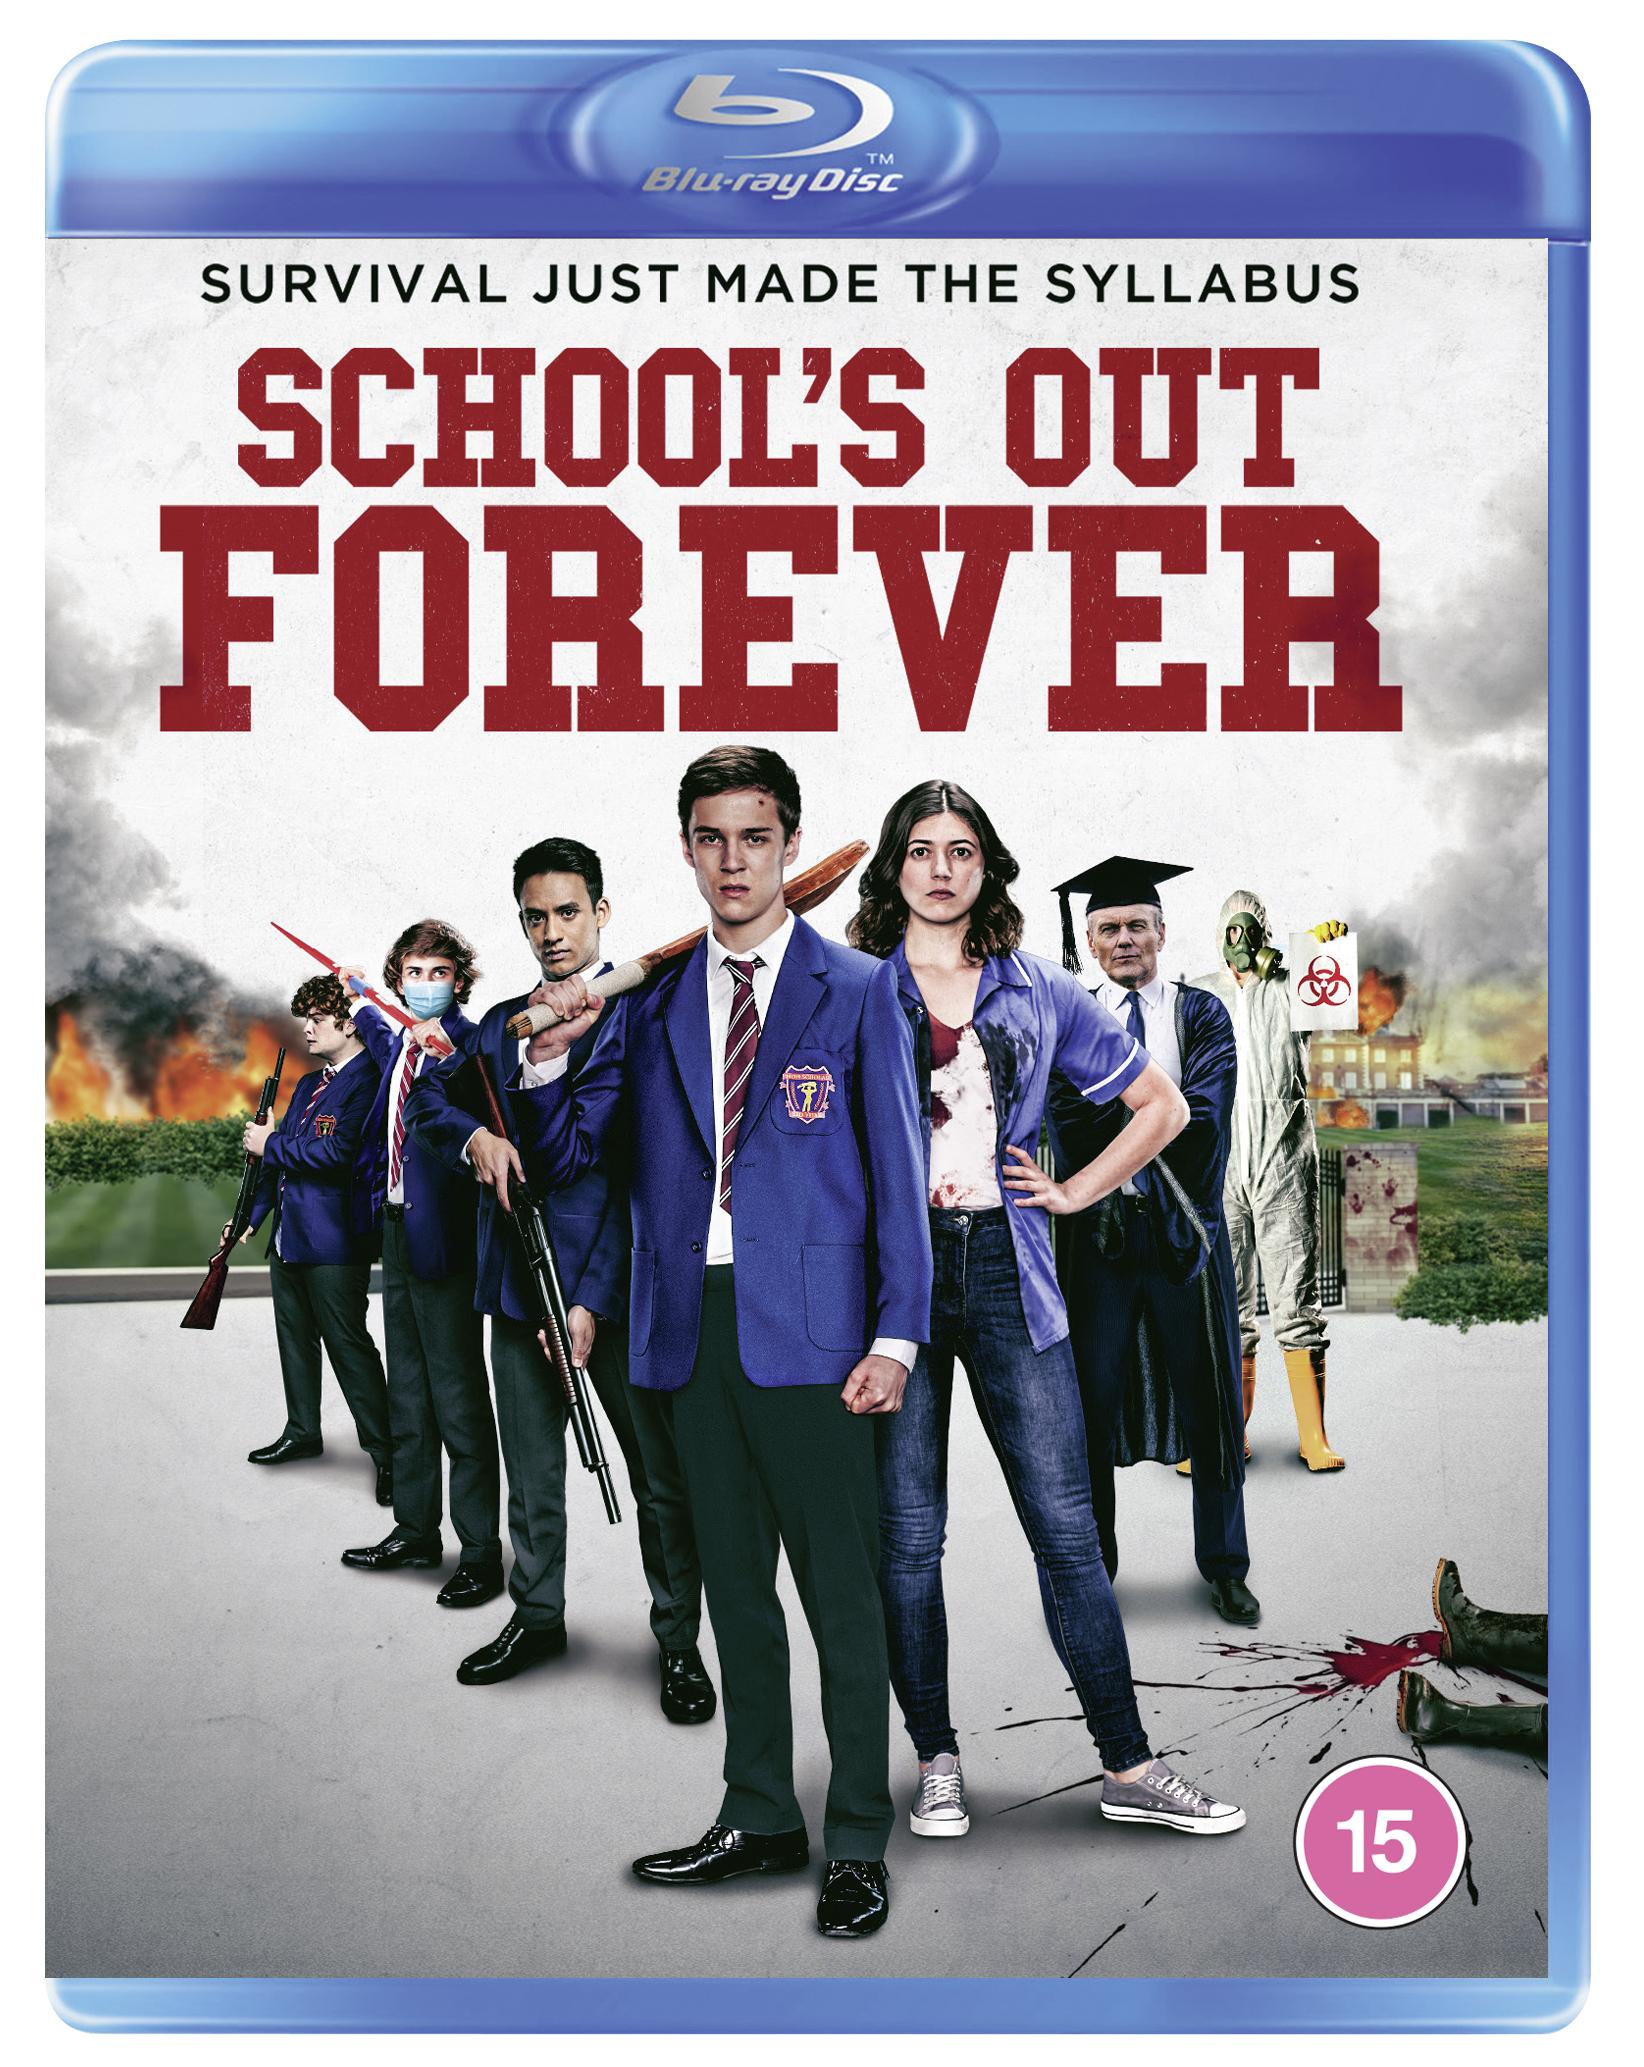 School's Out Forever (Blu-ray) - Rebellion Shop